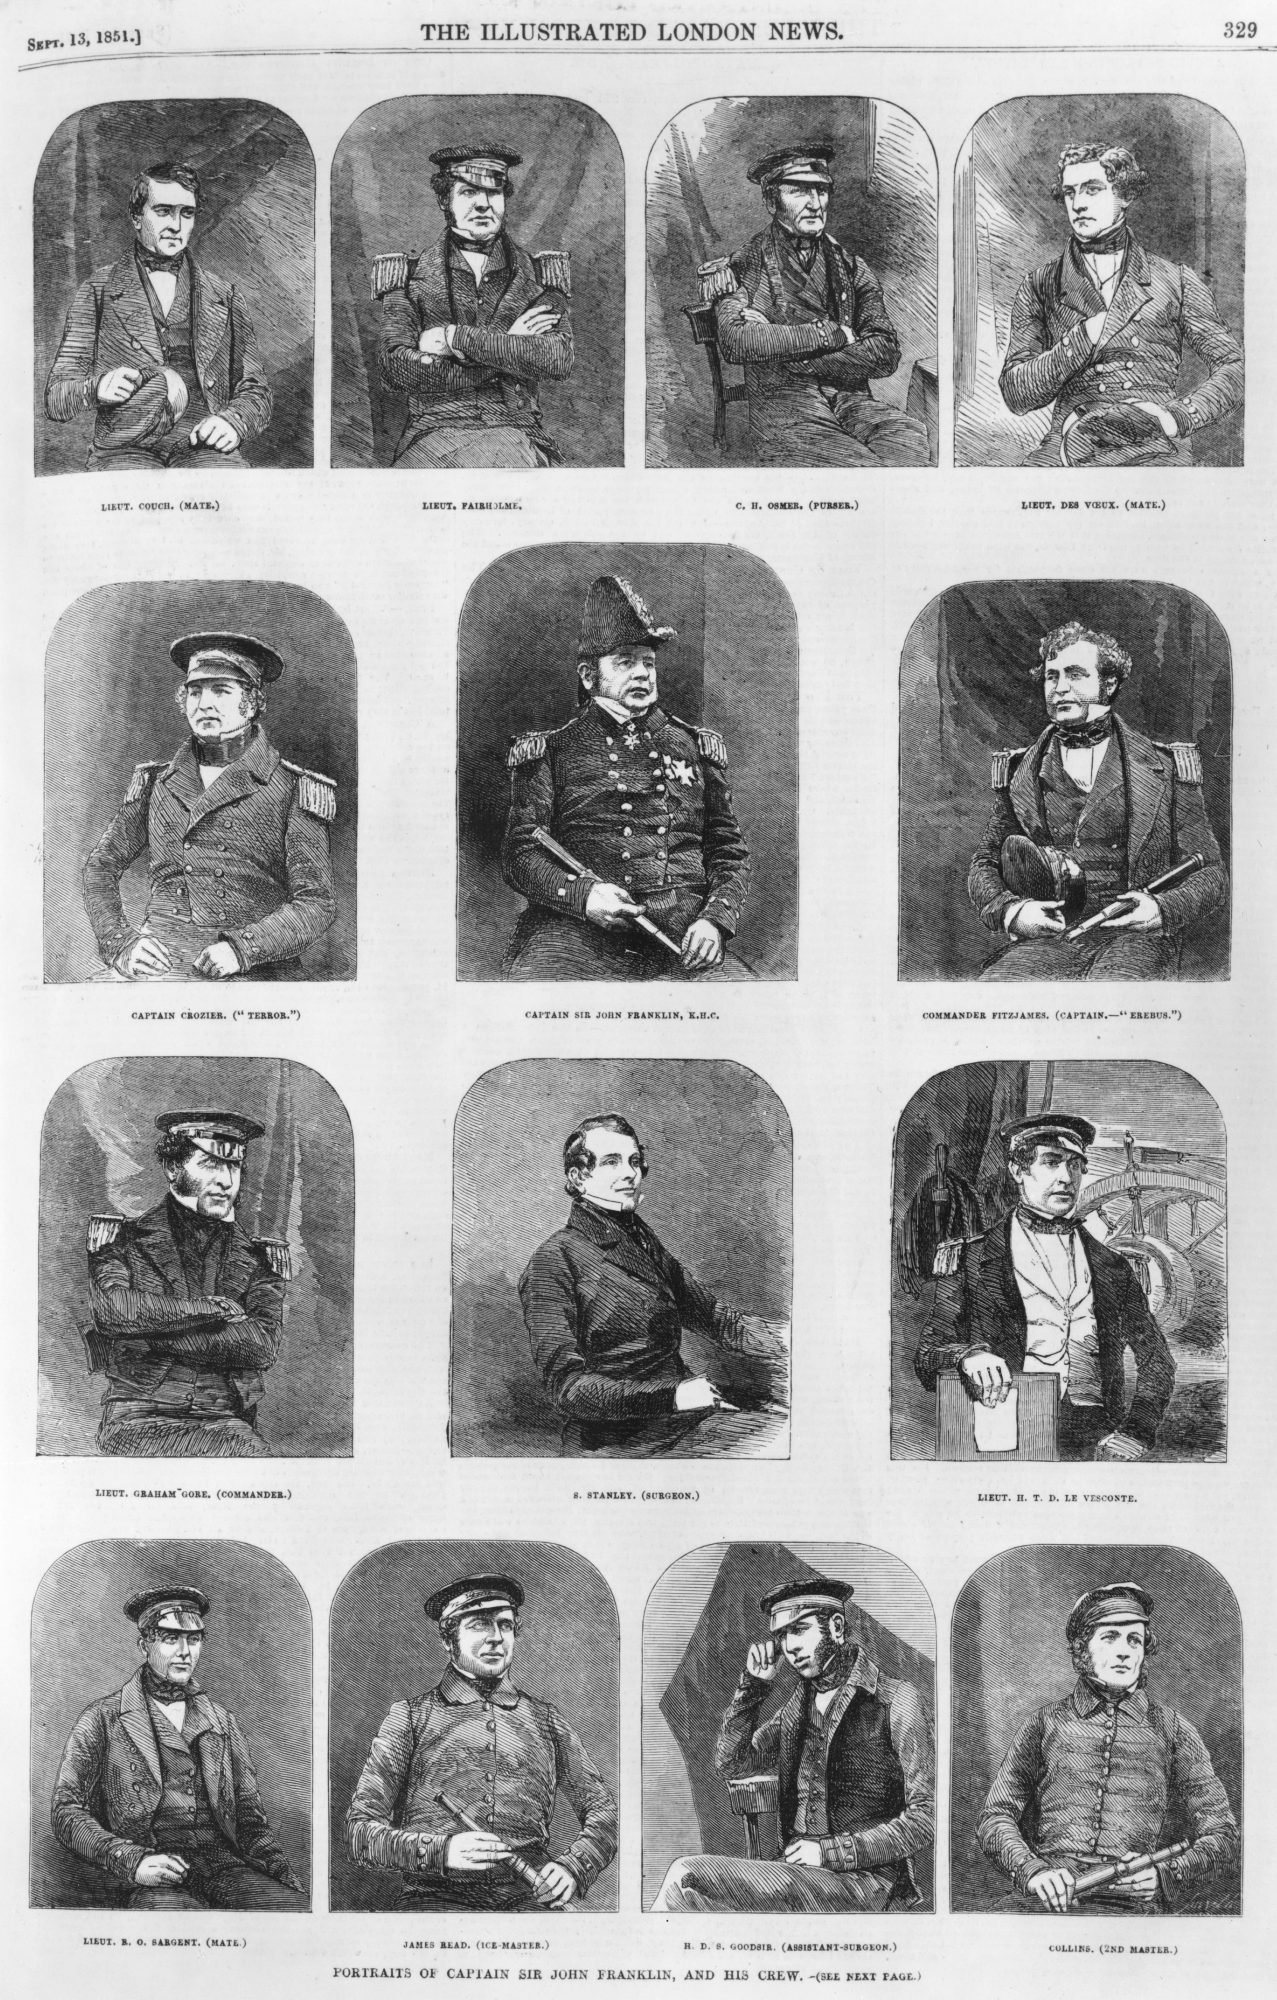 Portraits of Arctic explorer John Franklin and his crew, circa 1845. The entire expedition was lost on a voyage to the Northwest Passage. They are (left to right, from top) Lieutenant Couch (mate), Lieutenant Fairholme, C. H. Osmer (purser), Lieutenant des Voeux (mate), Captain Crozier of the 'Terror', Captain Sir John Franklin, Commander Fitzjames of the 'Erebus', Lieutenant Graham Gore (Commander), S. Stanley (surgeon), Lieutenant H. T. D. le Vesconte, Lieutenant B. O. Sargent (mate), James Read (ice-master), H. D. S. Goodsir (assistant surgeon) and Collins (second master). Original Publication : Illustrated London News - pub. 13th September 1851 (Photo by Hulton Archive/Getty Images)